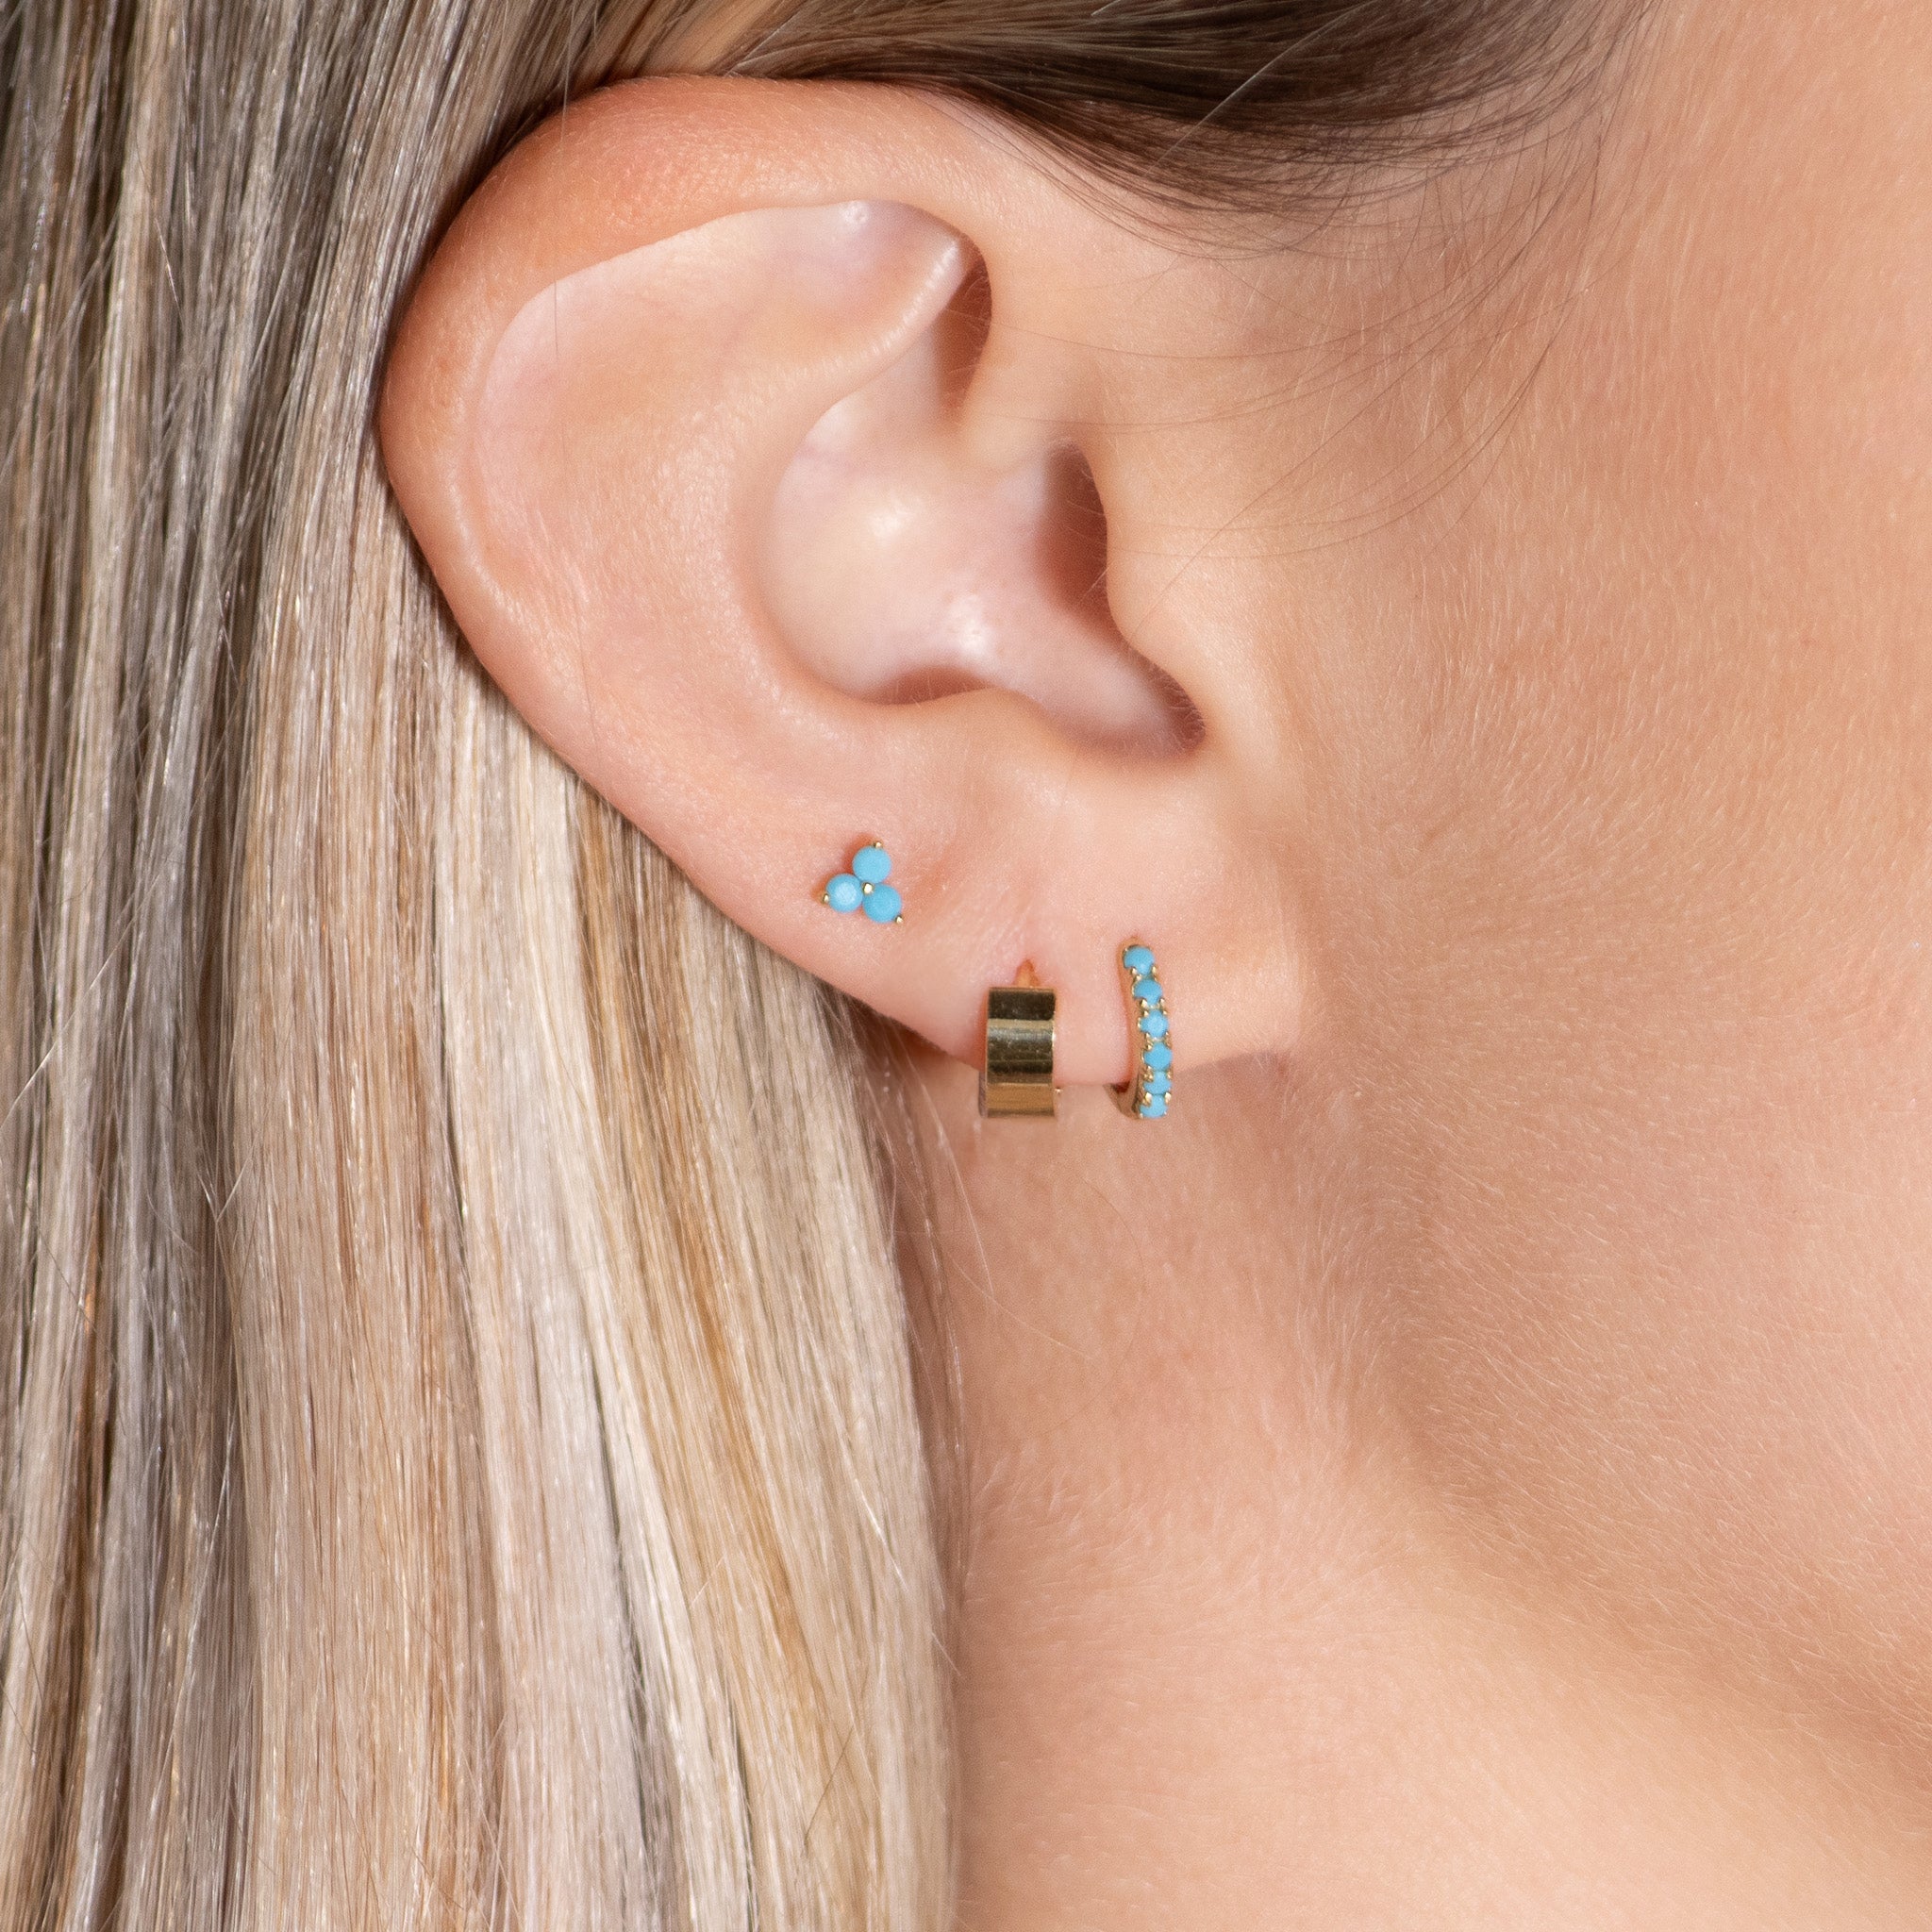 Turquoise Trinity Cluster Flat Back Earring Earrings Estella Collection #product_description# 18133 14k Birthstone Cartilage Earring #tag4# #tag5# #tag6# #tag7# #tag8# #tag9# #tag10# 5MM